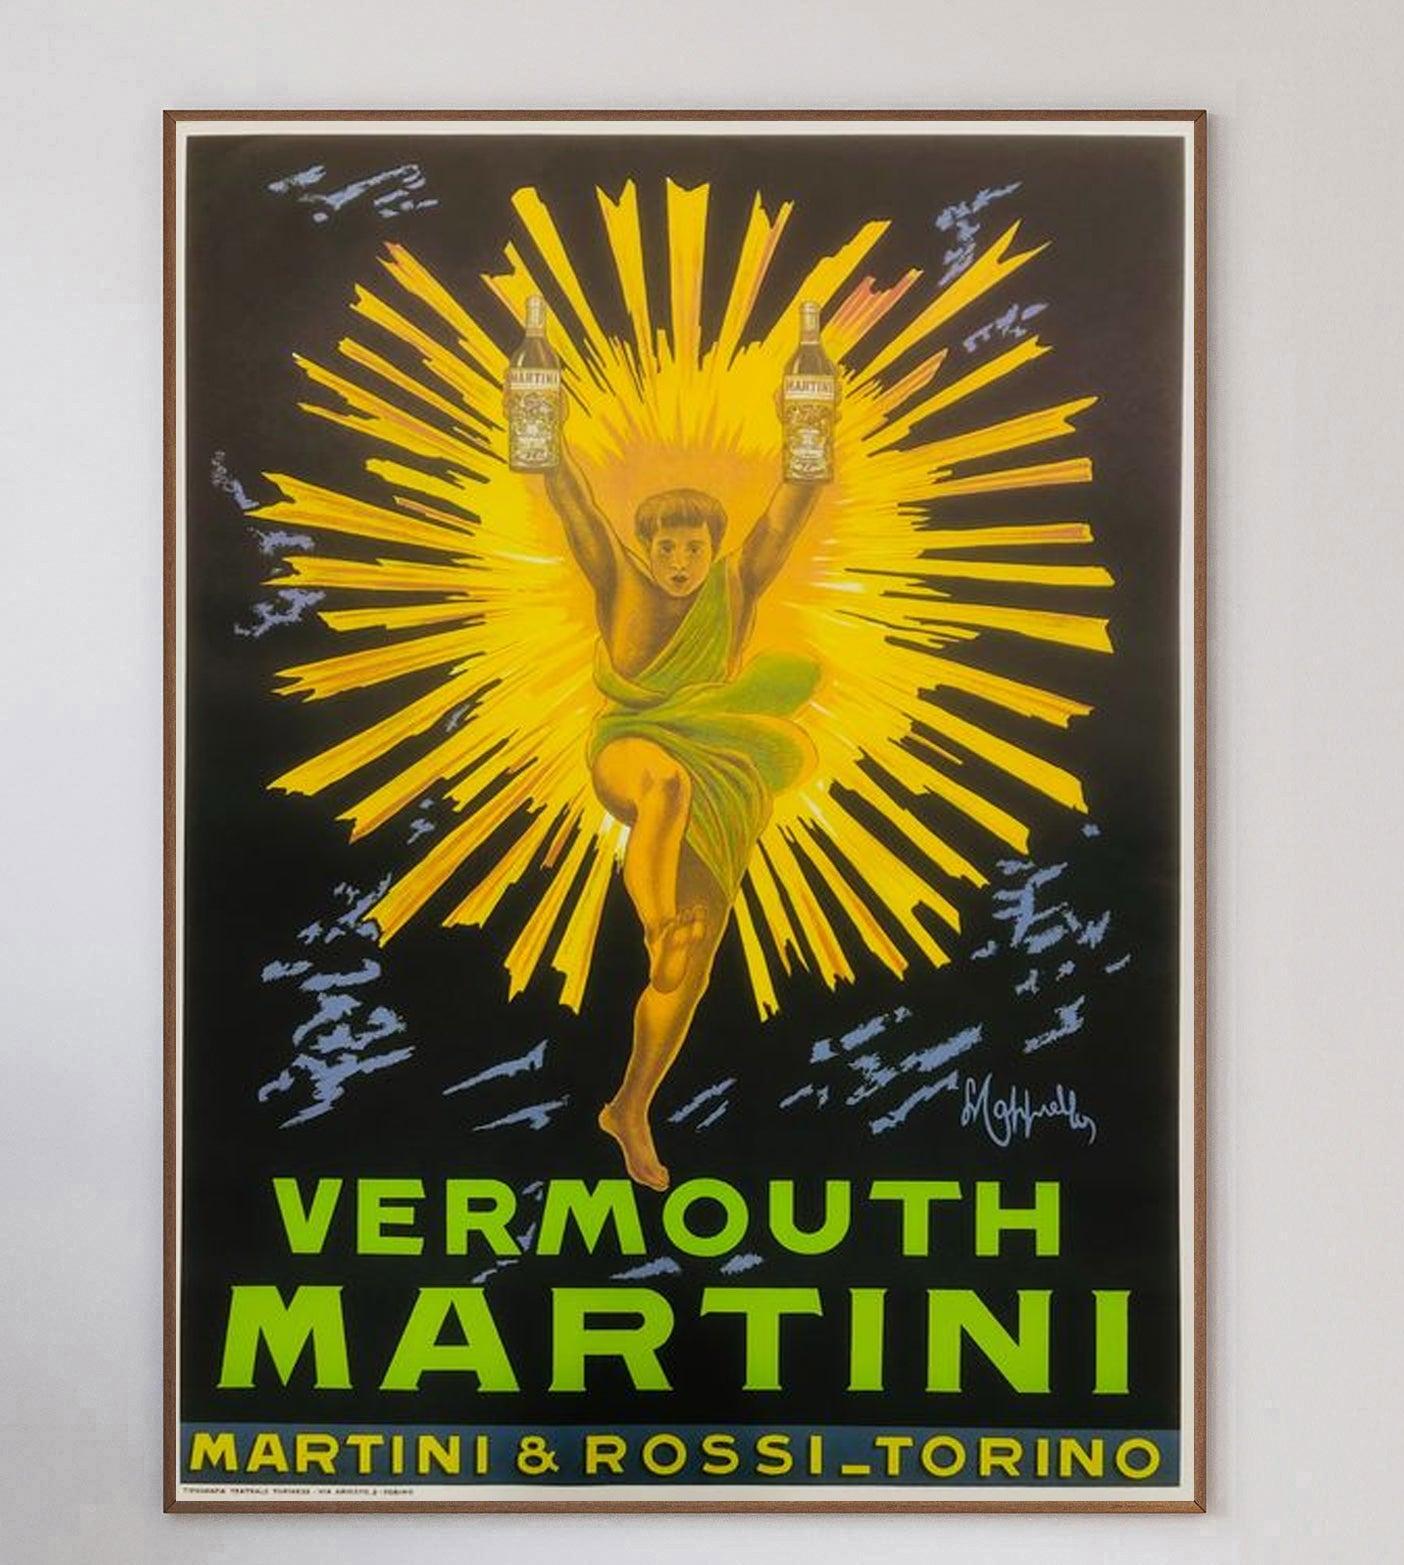 Beginning in the mid-19th Century in Italy, Martini & Rosso has become a multi-national beverage brand.

Illustrated by the iconic poster designer Leonetto Cappiello, best known for his collaborations with many European liqueur brands including